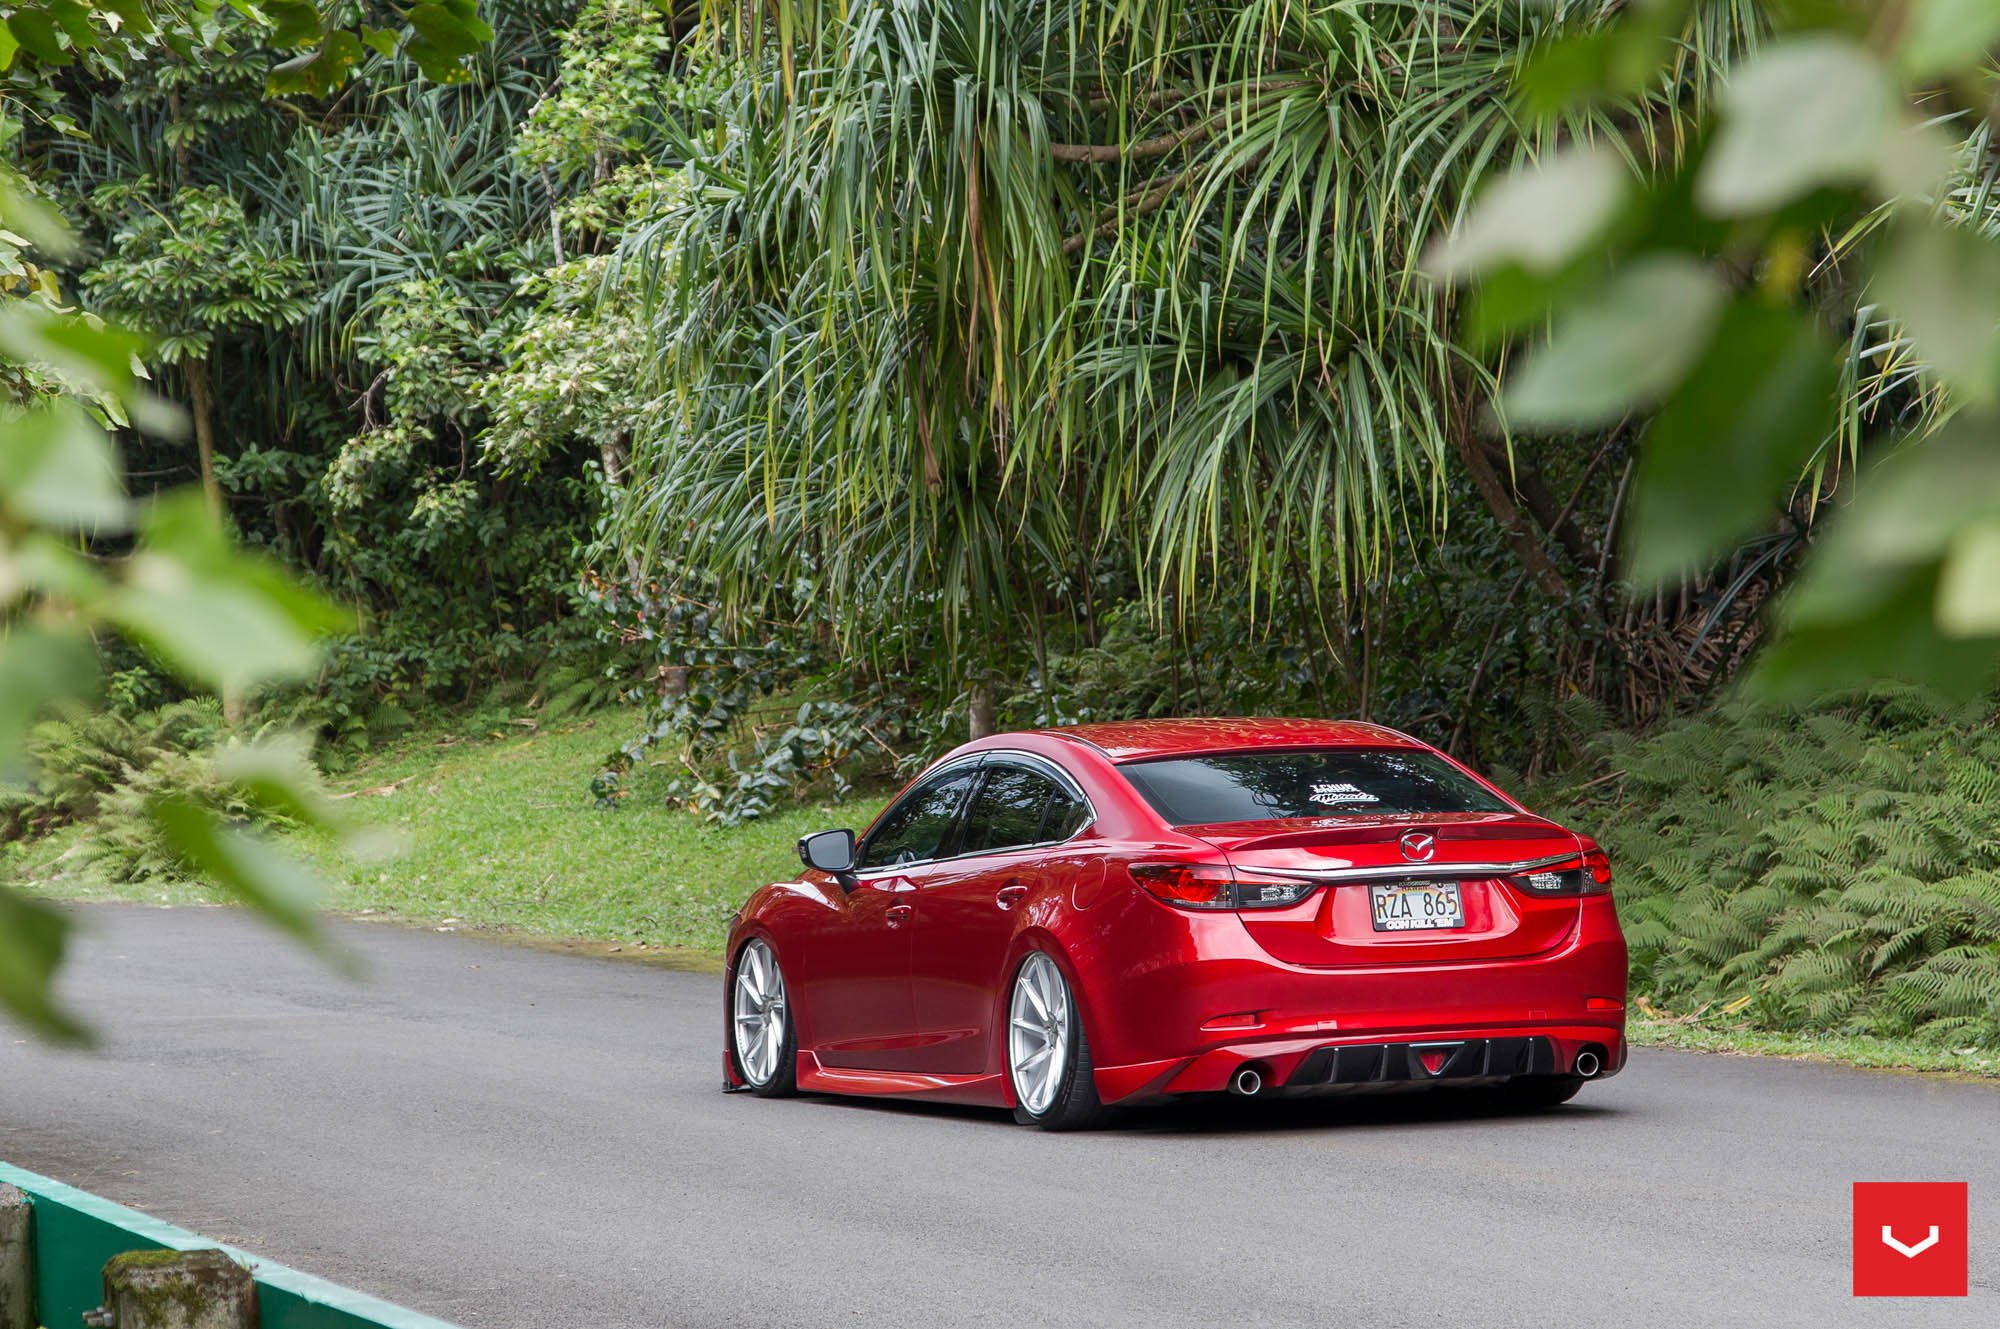 Red Lowered Mazda 6 with Custom Rear Diffuser - Photo by Vossen